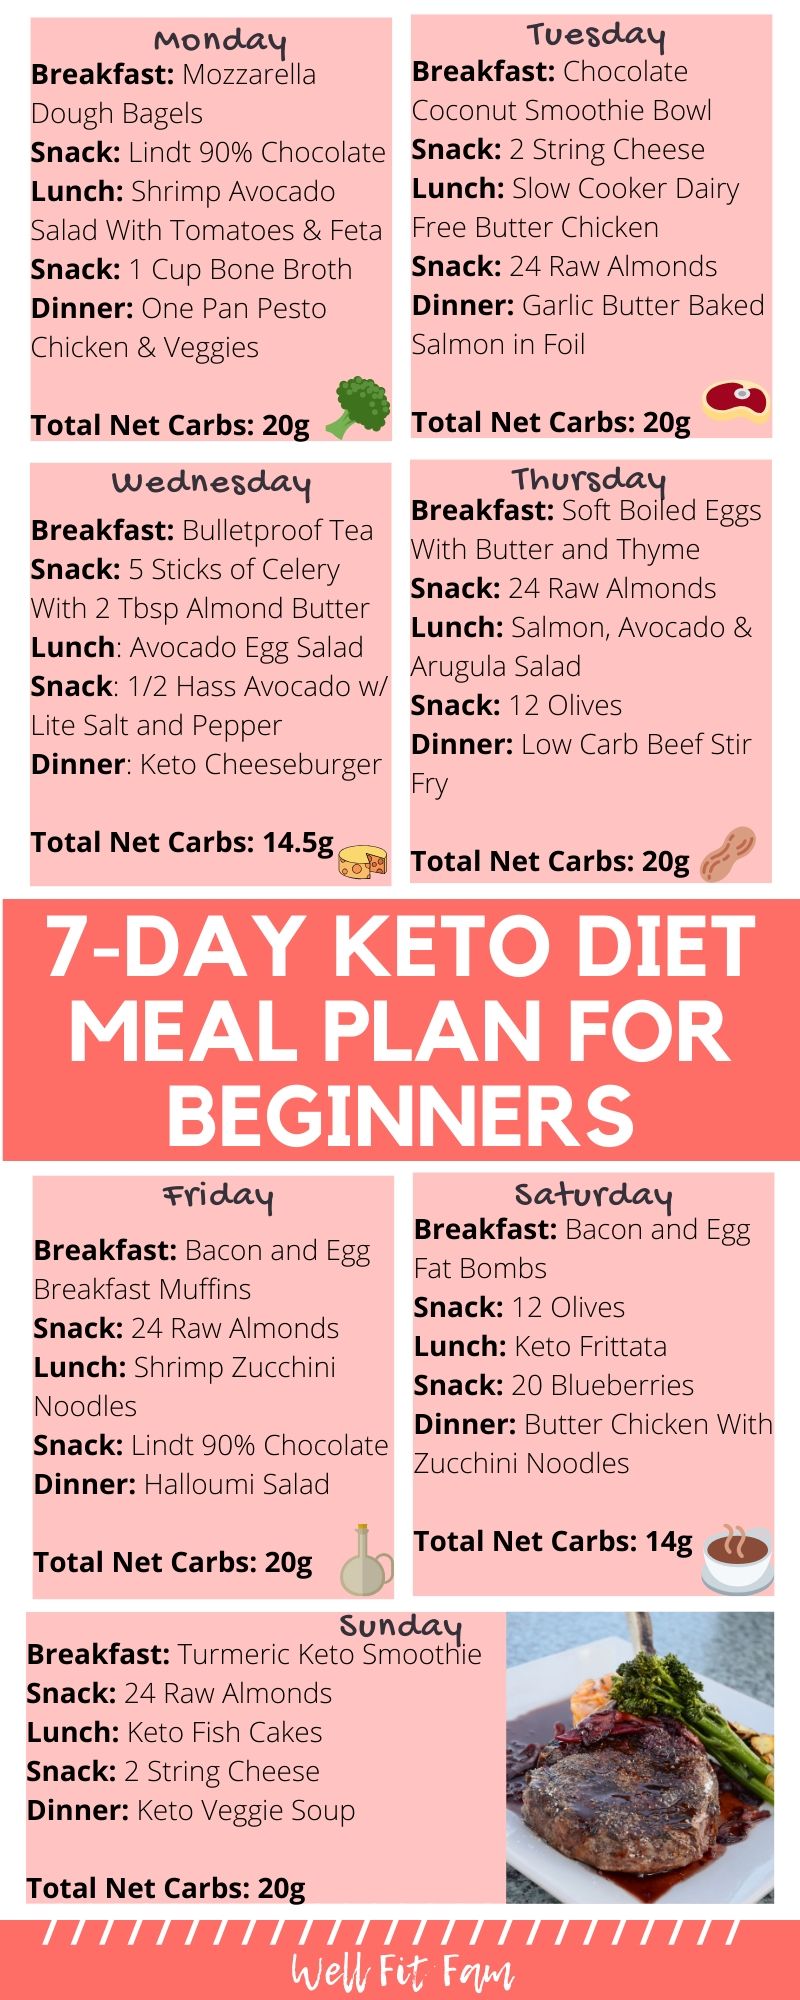 What Wouldbe A Good Keto Meal Plan